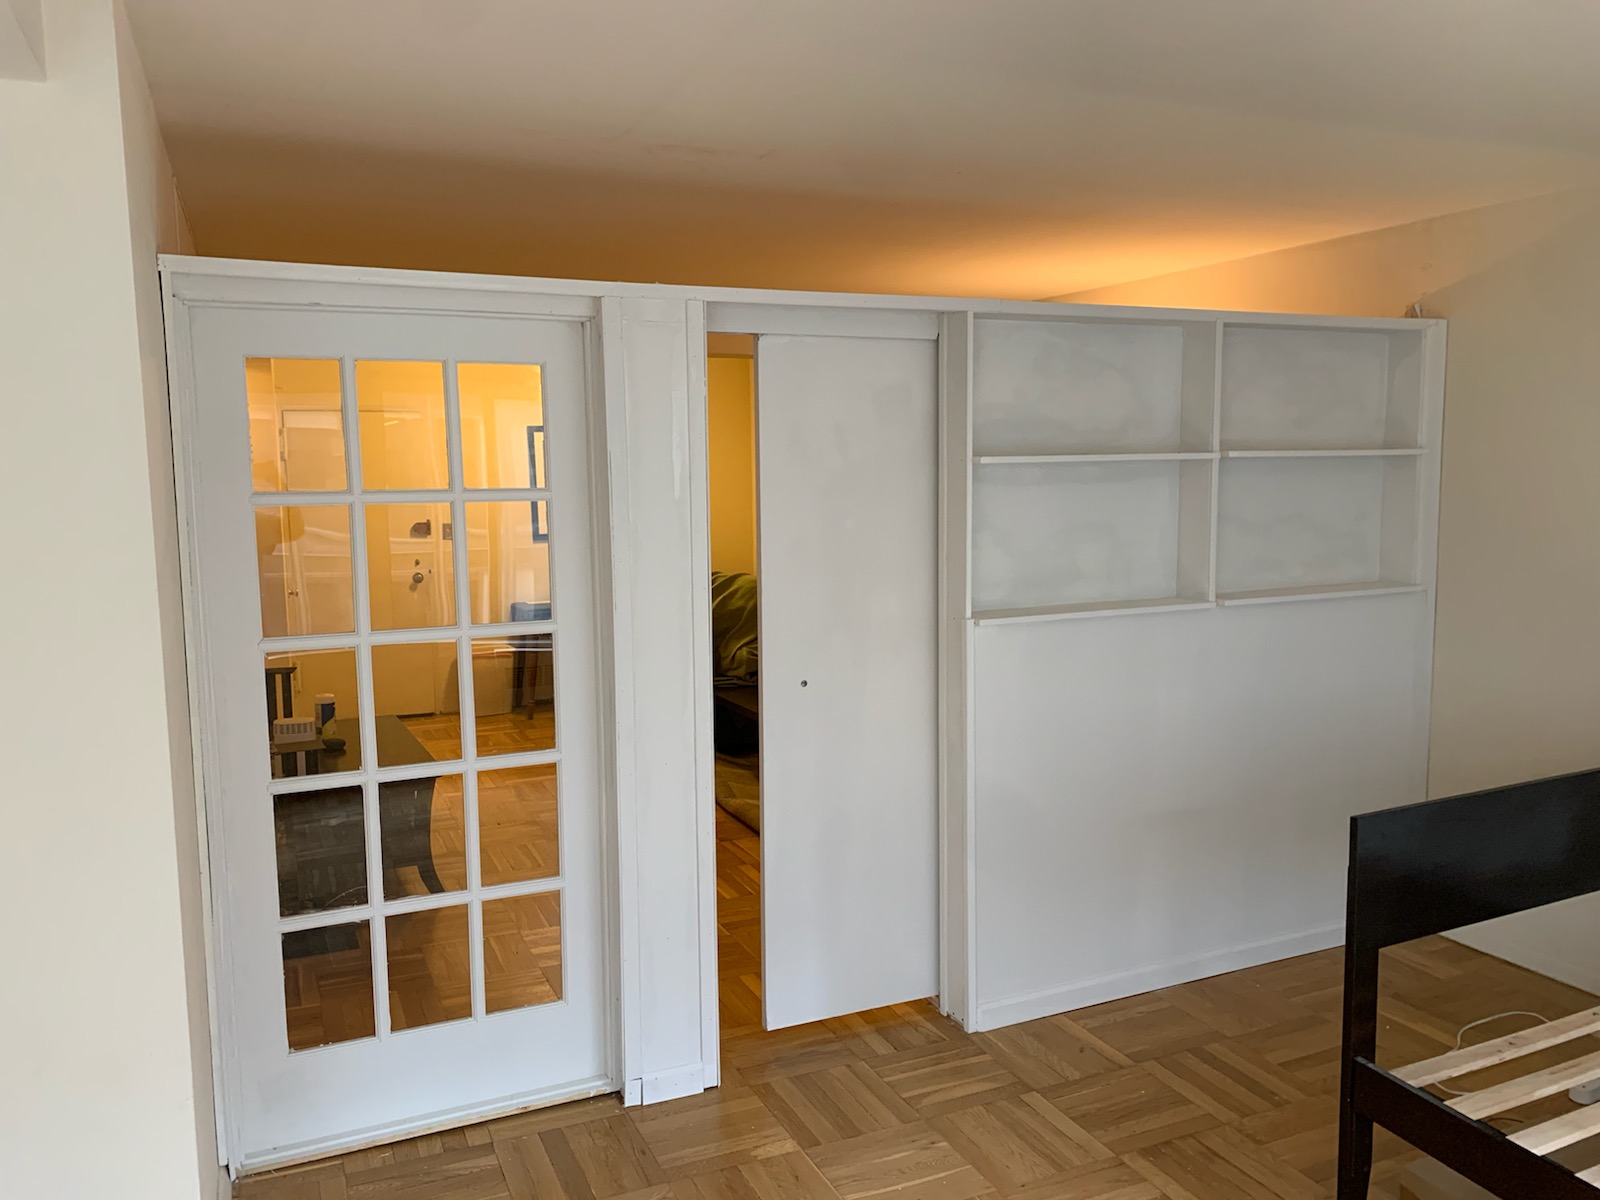 Best Bookshelf Temporary Walls For Nyc, Shelving That Doesn T Damage Walls